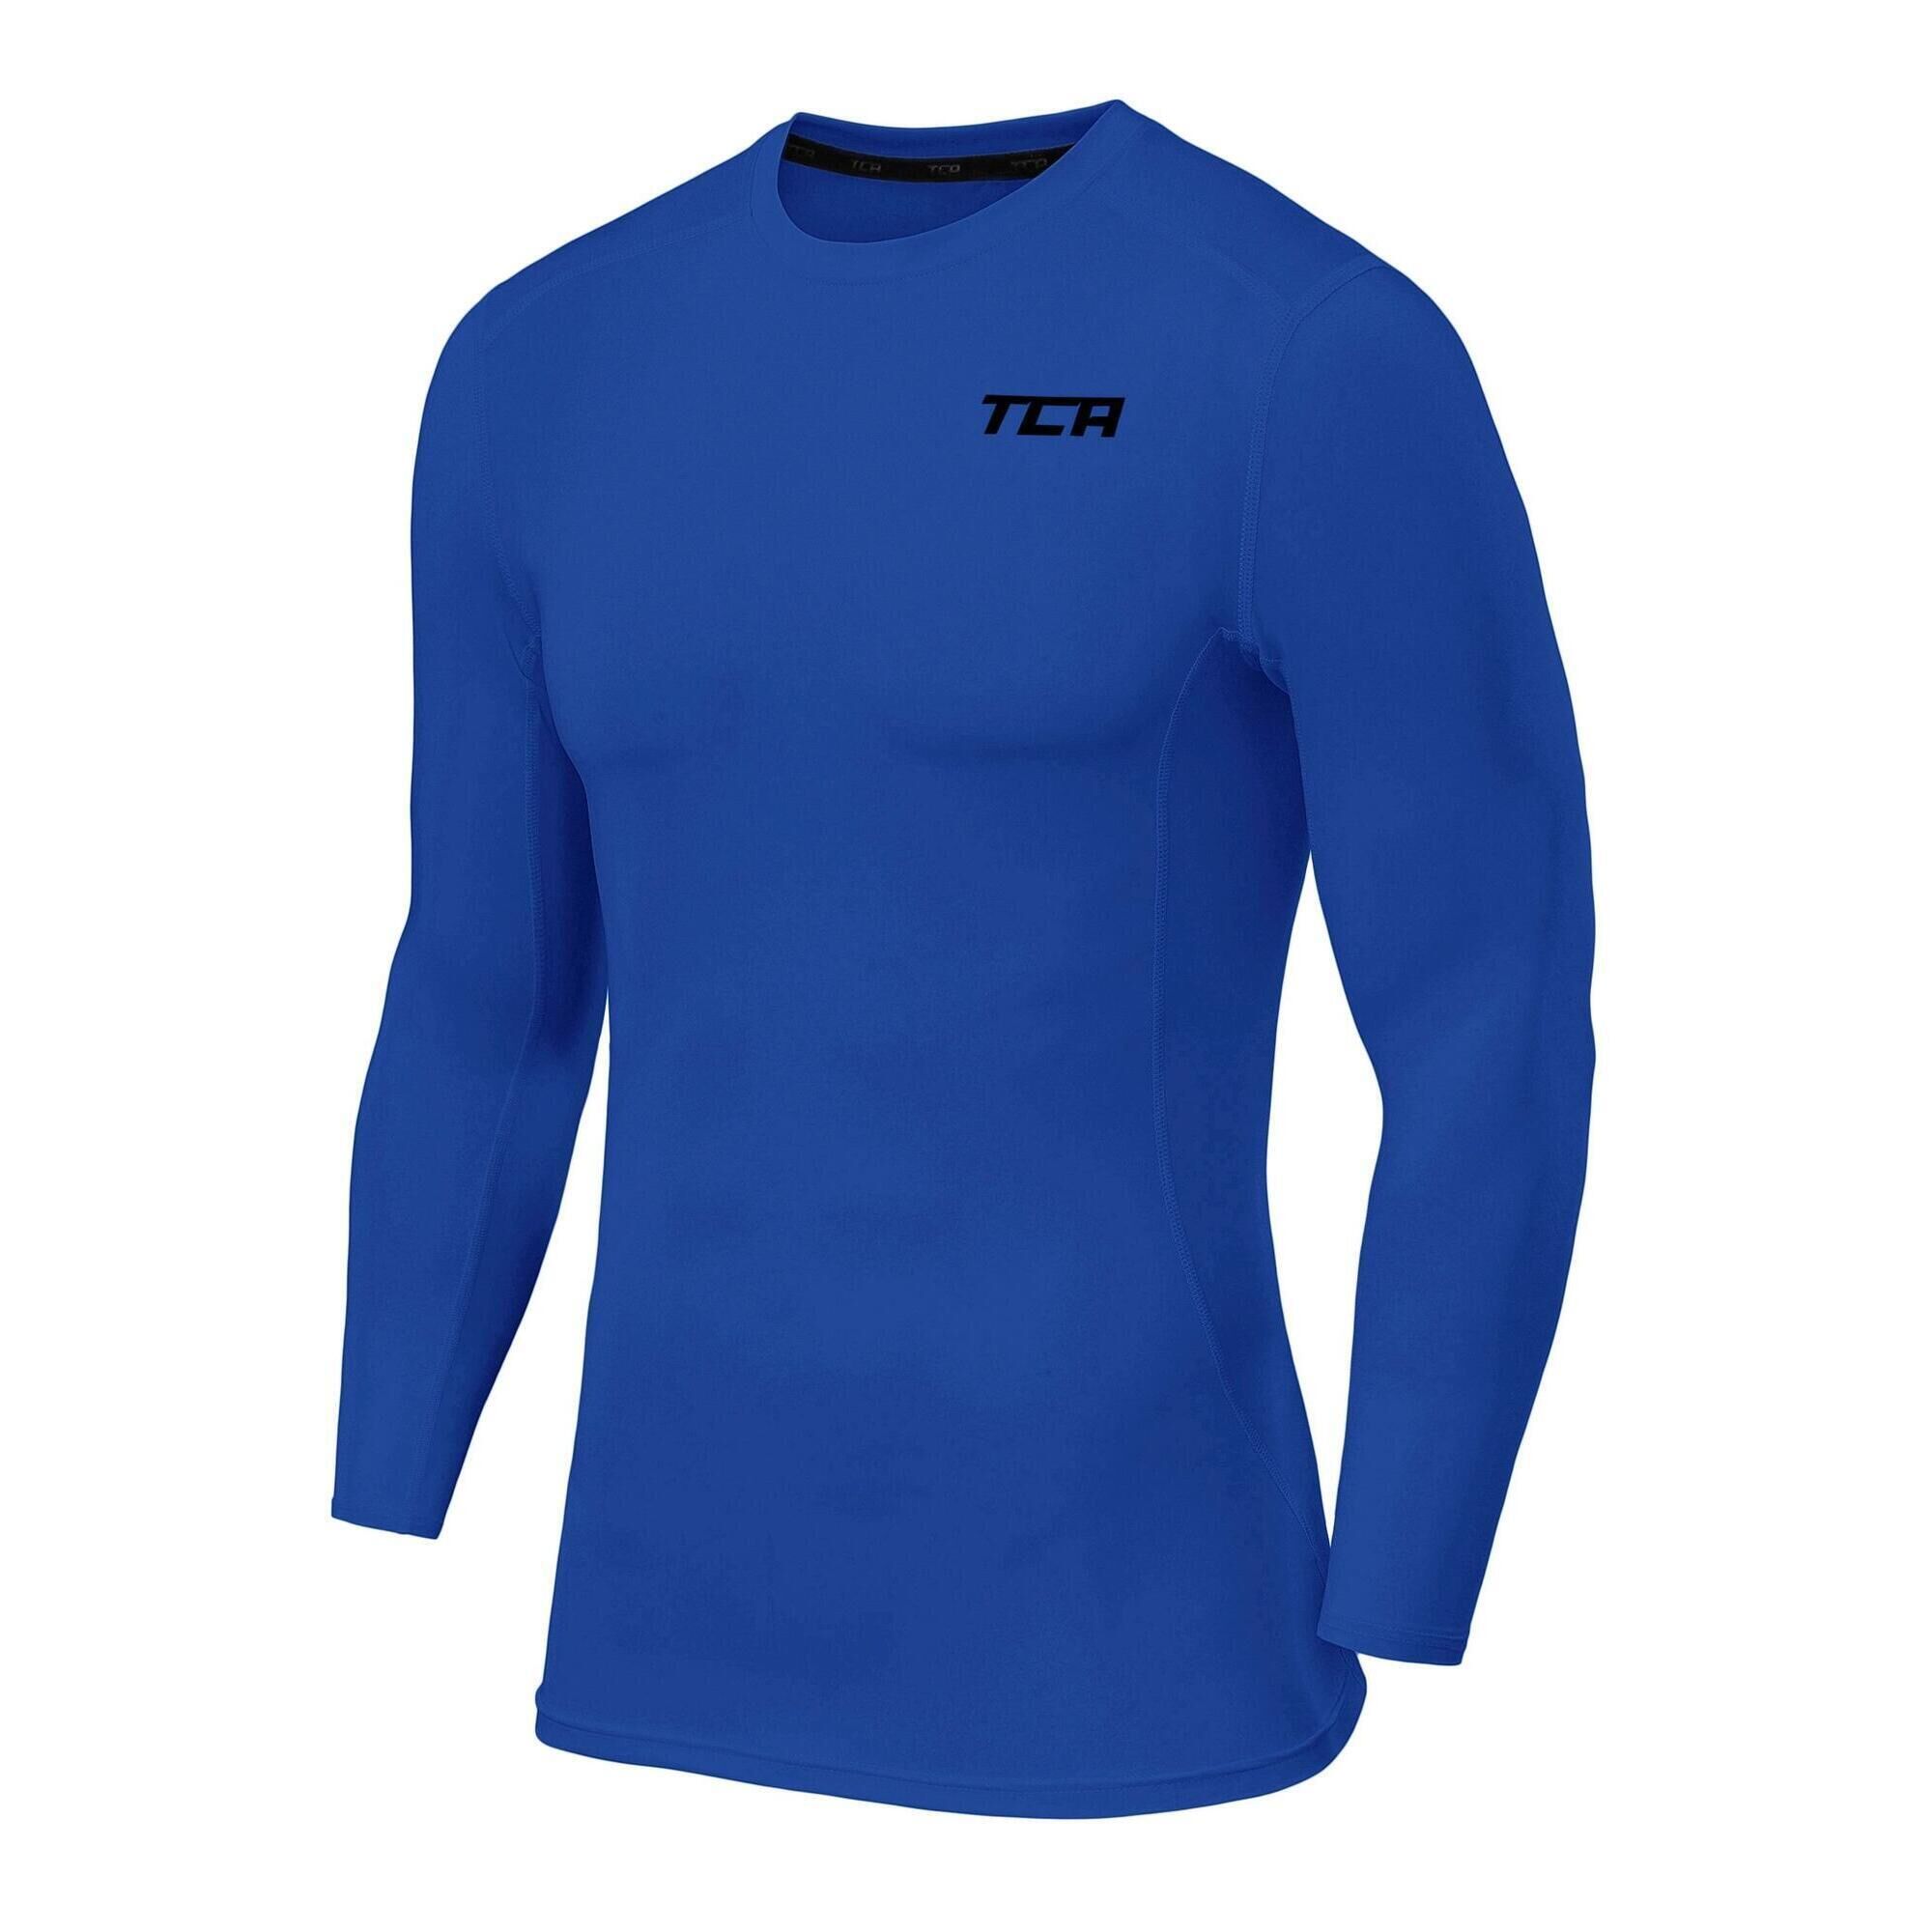 TCA Men's Power Base Layer Compression Long Sleeve Top - Dazzling Blue